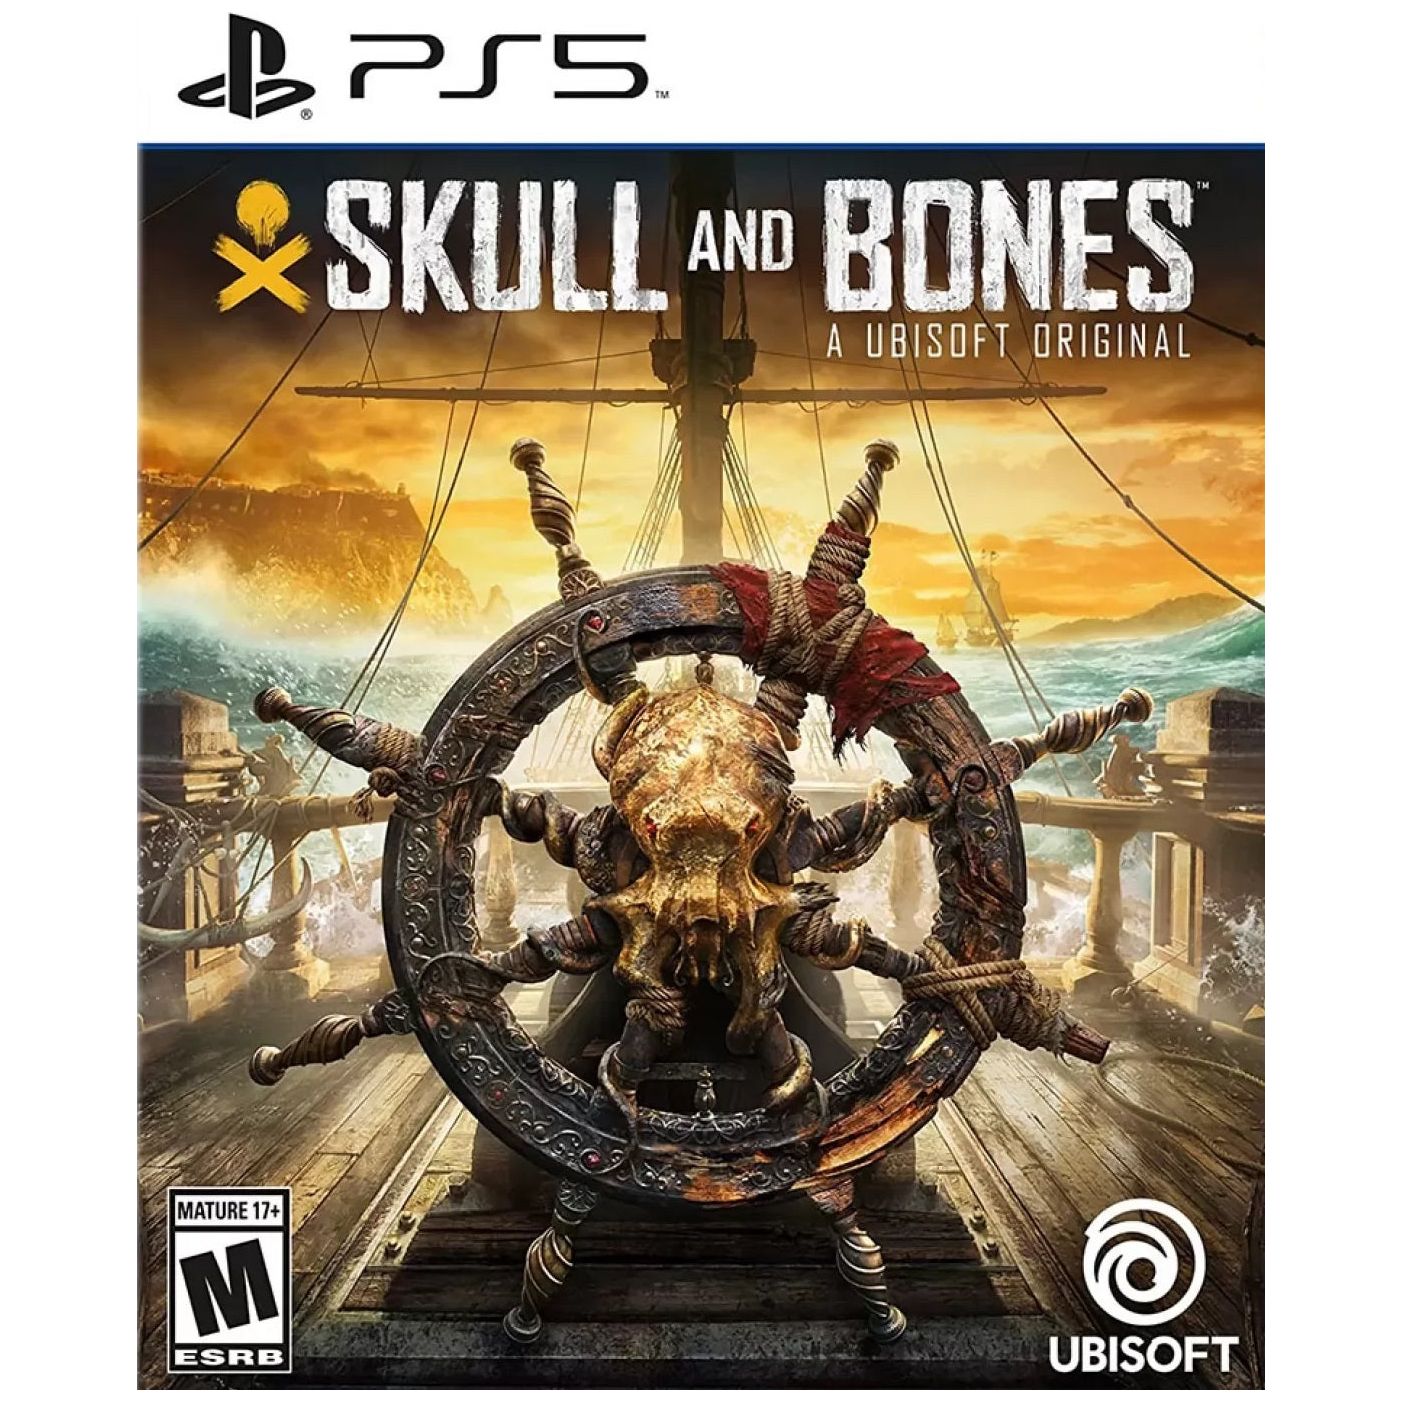 PS5 - Skull and Bones (Sealed)